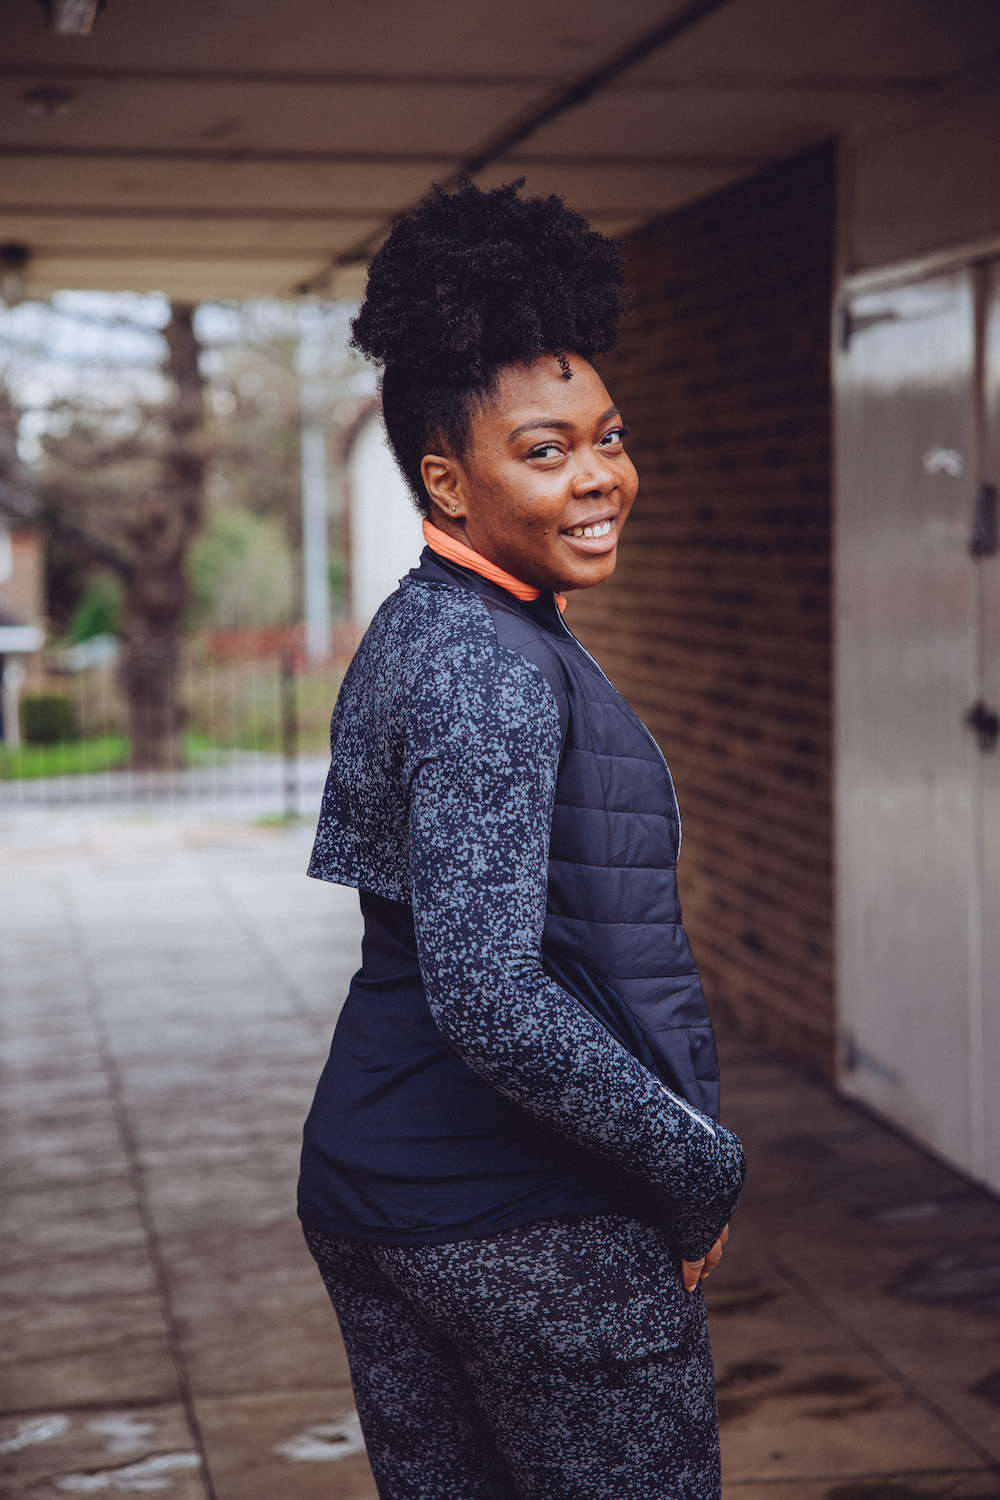 How To Layer For Running in Cold Weather - keep it simpElle